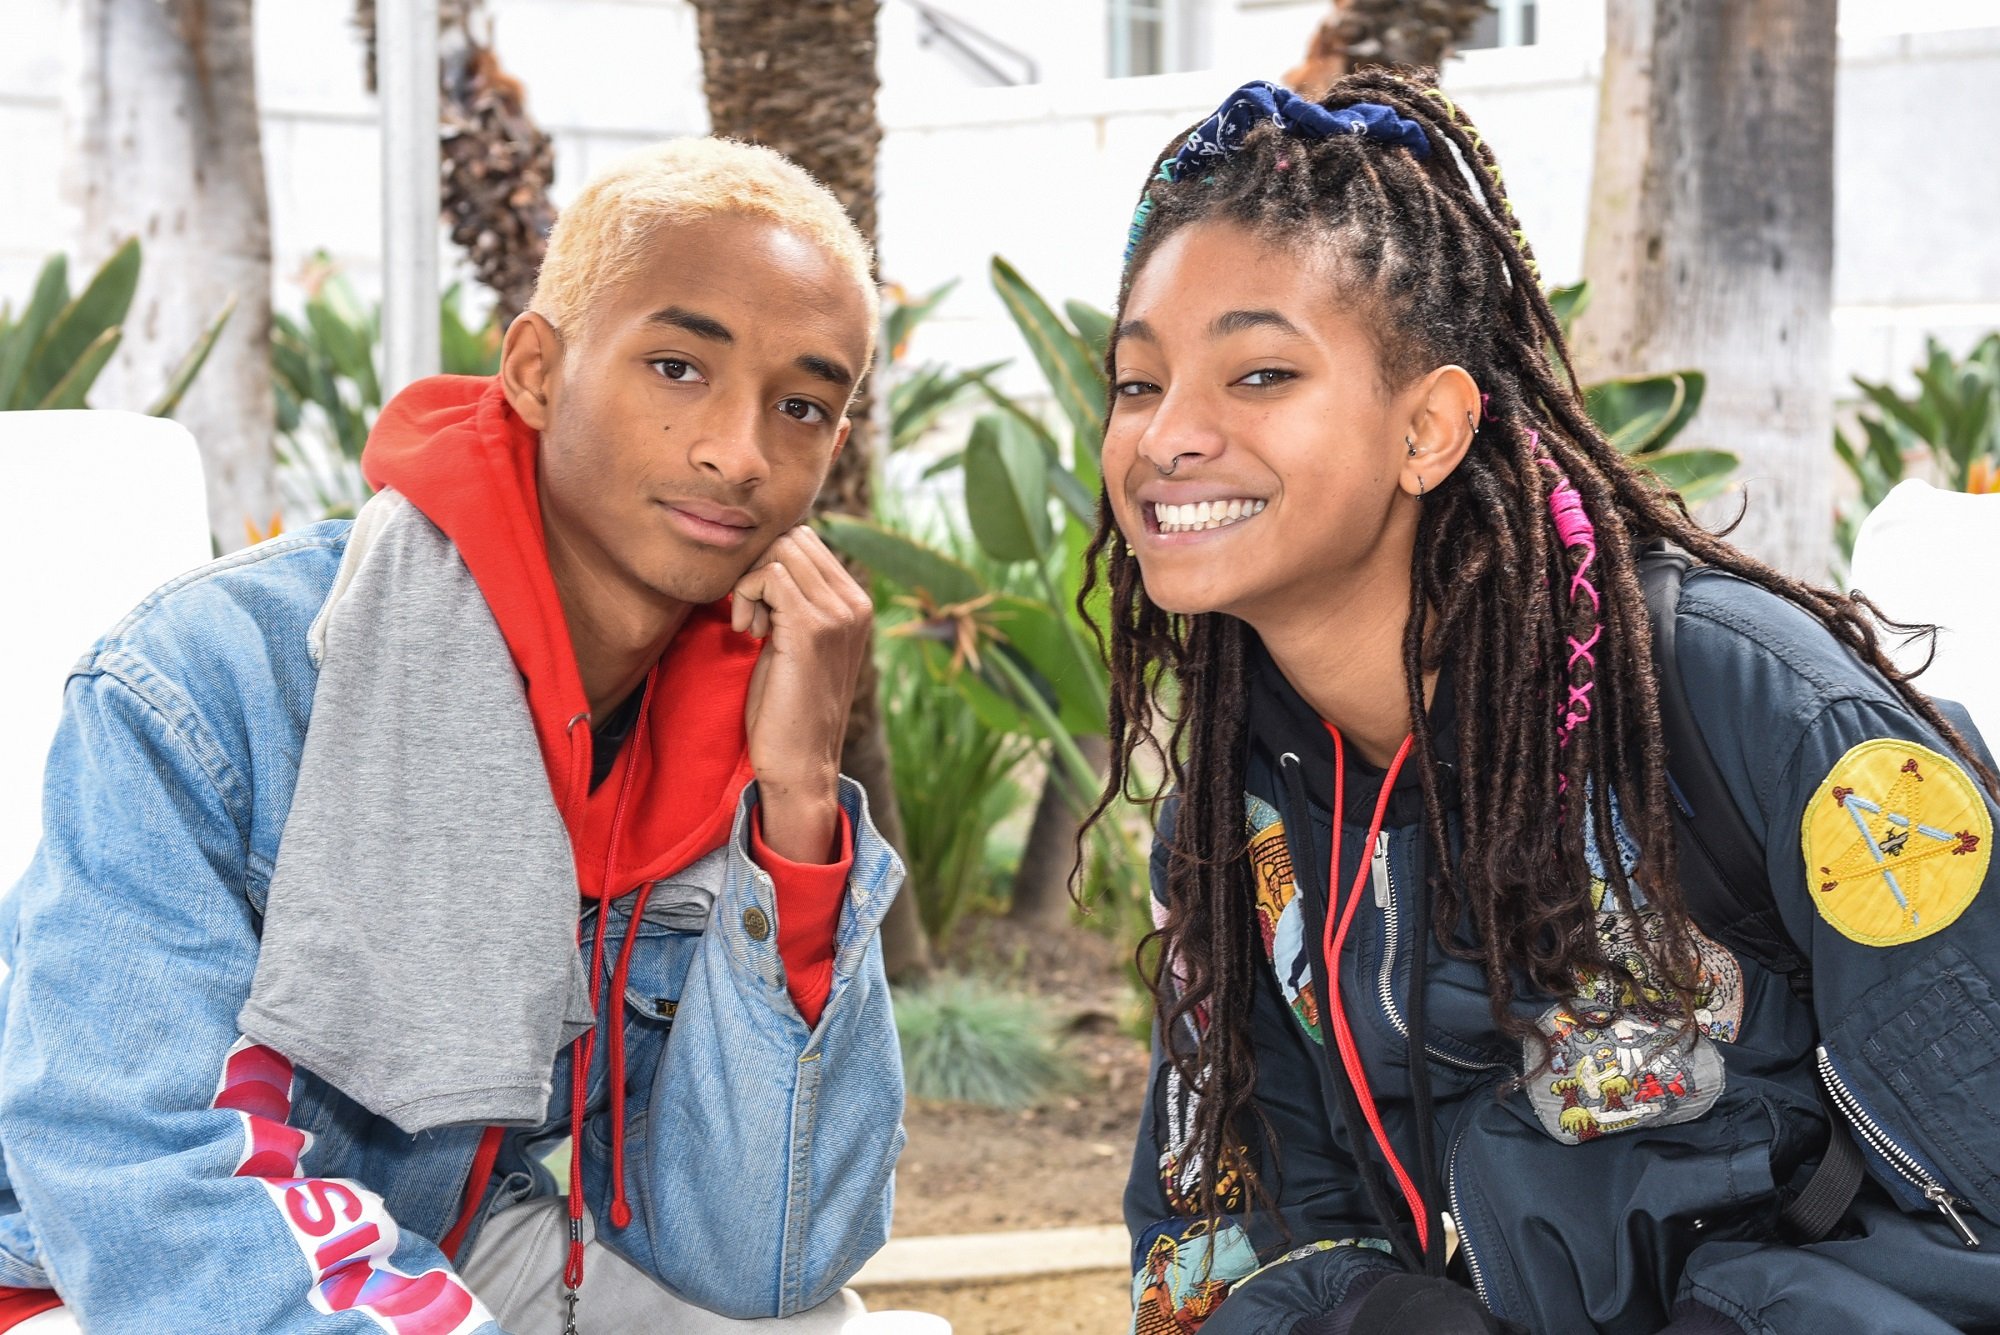 Willow and Jaden Smith have been underrated for too long